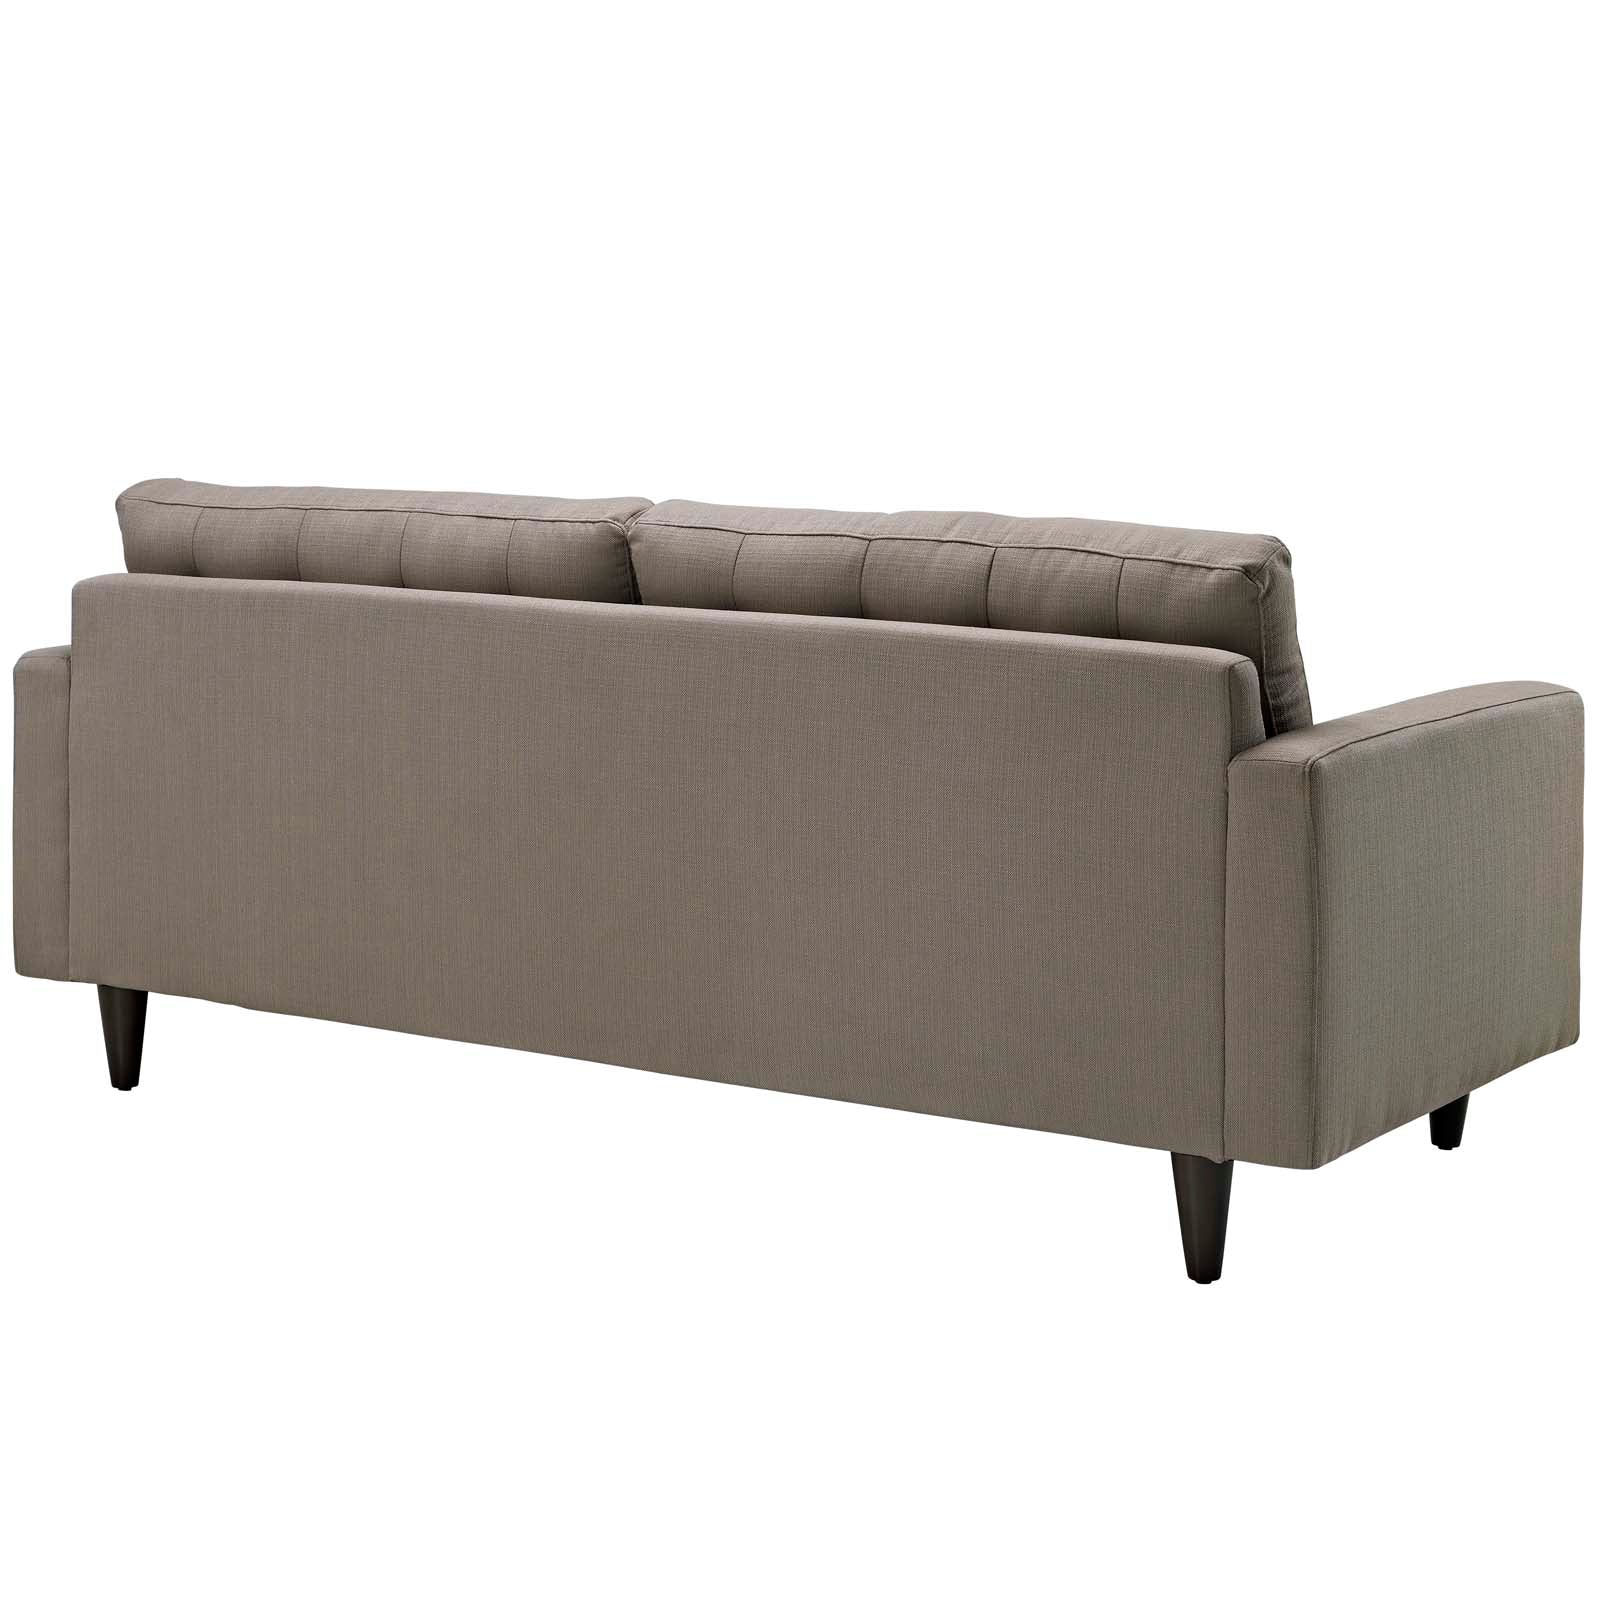 Modway Sofas & Couches - Empress Upholstered Fabric Sofa Granite